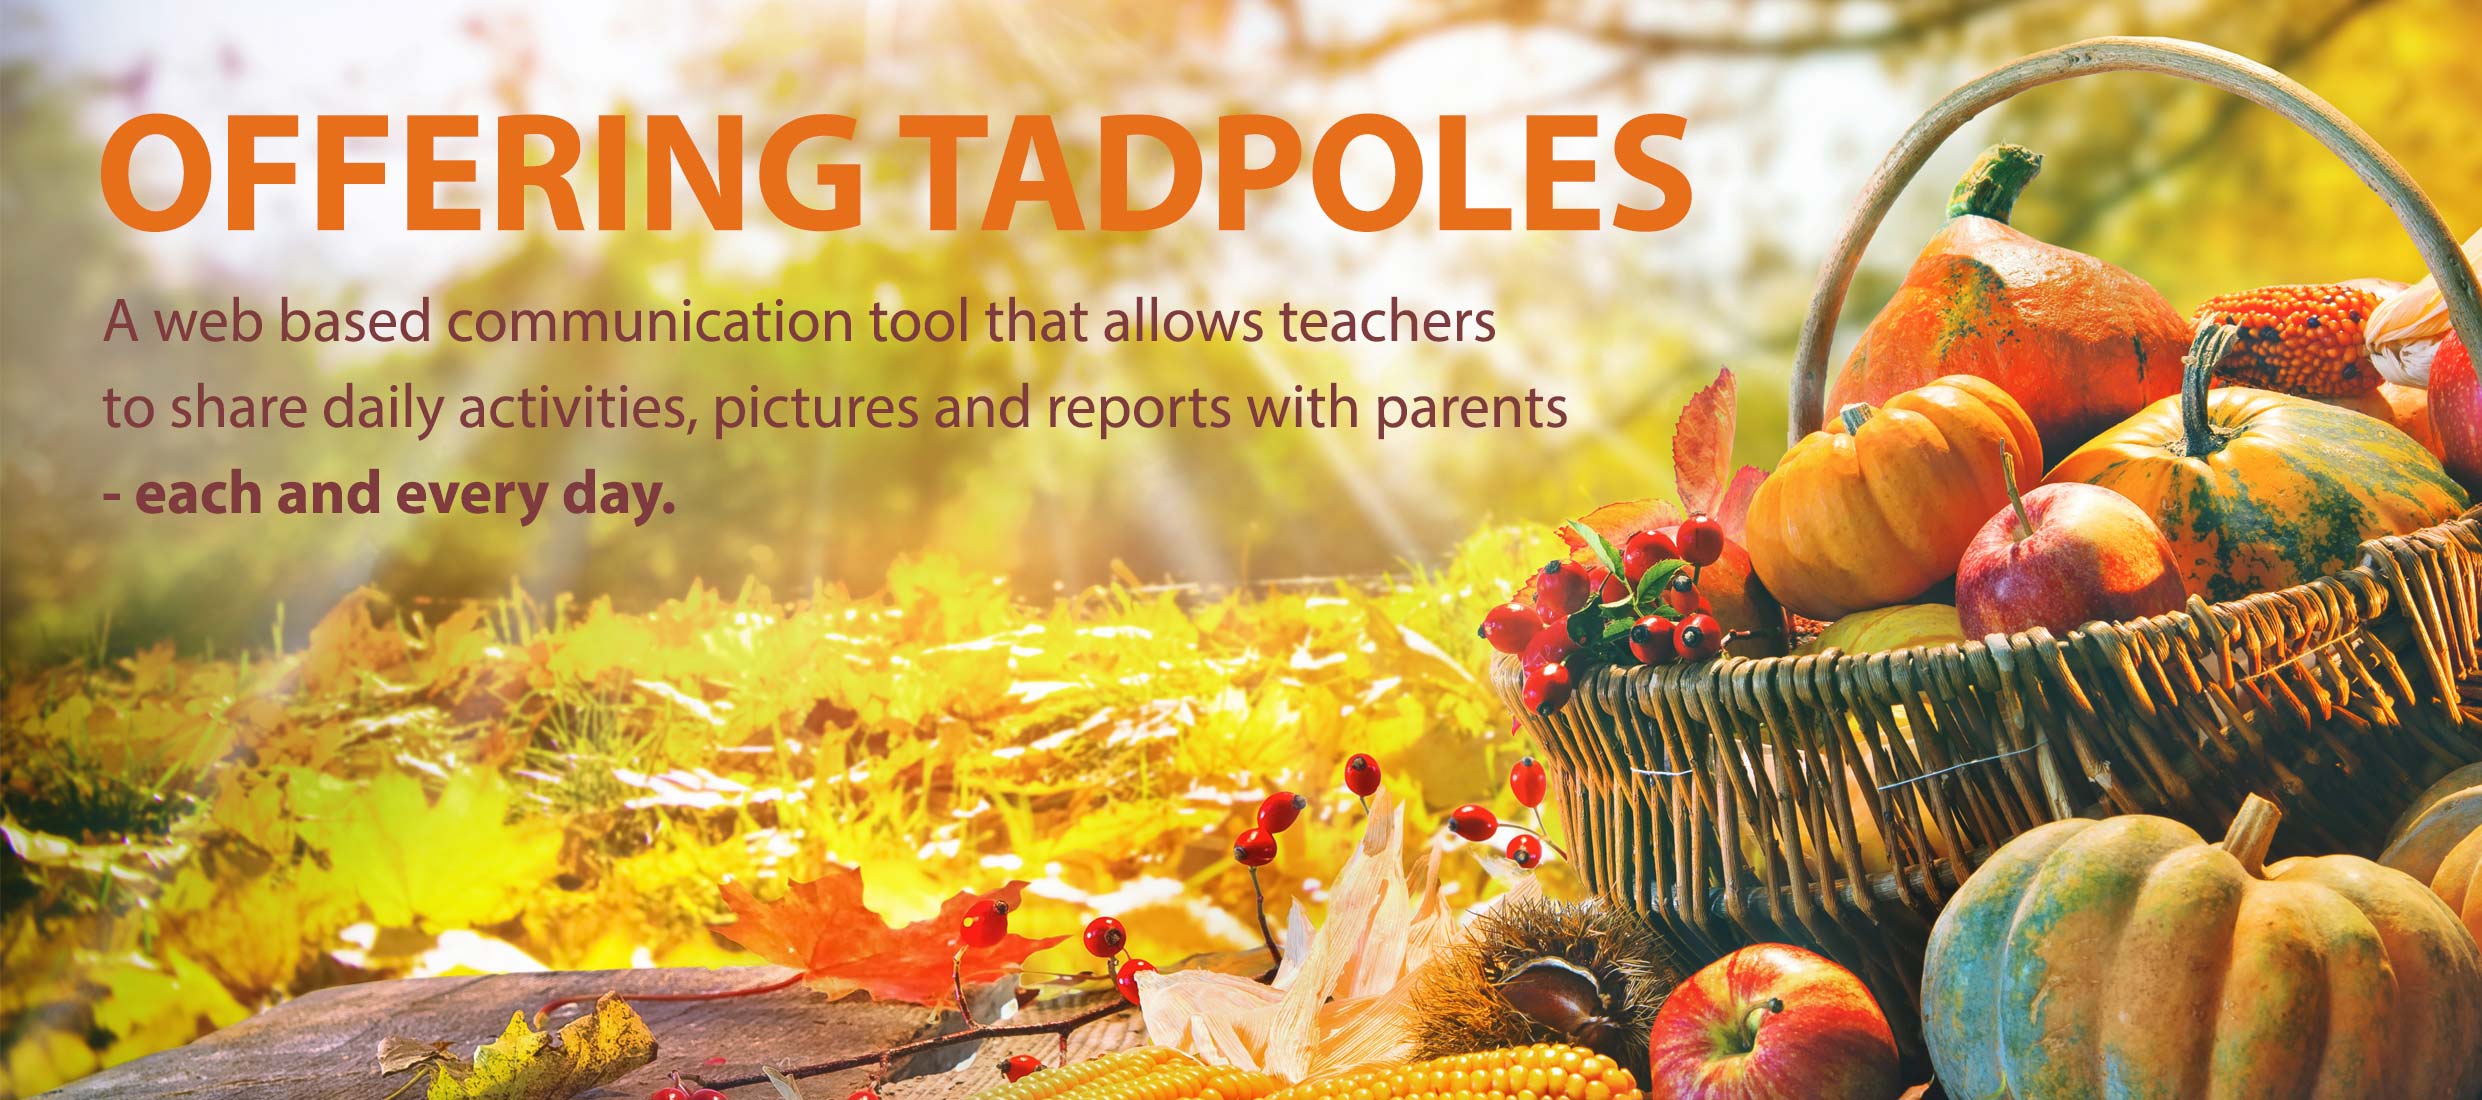 OFFERING TADPOLES : A web based communication tool that allows teachers to share daily activities, pictures and reports with parents - each and every day.